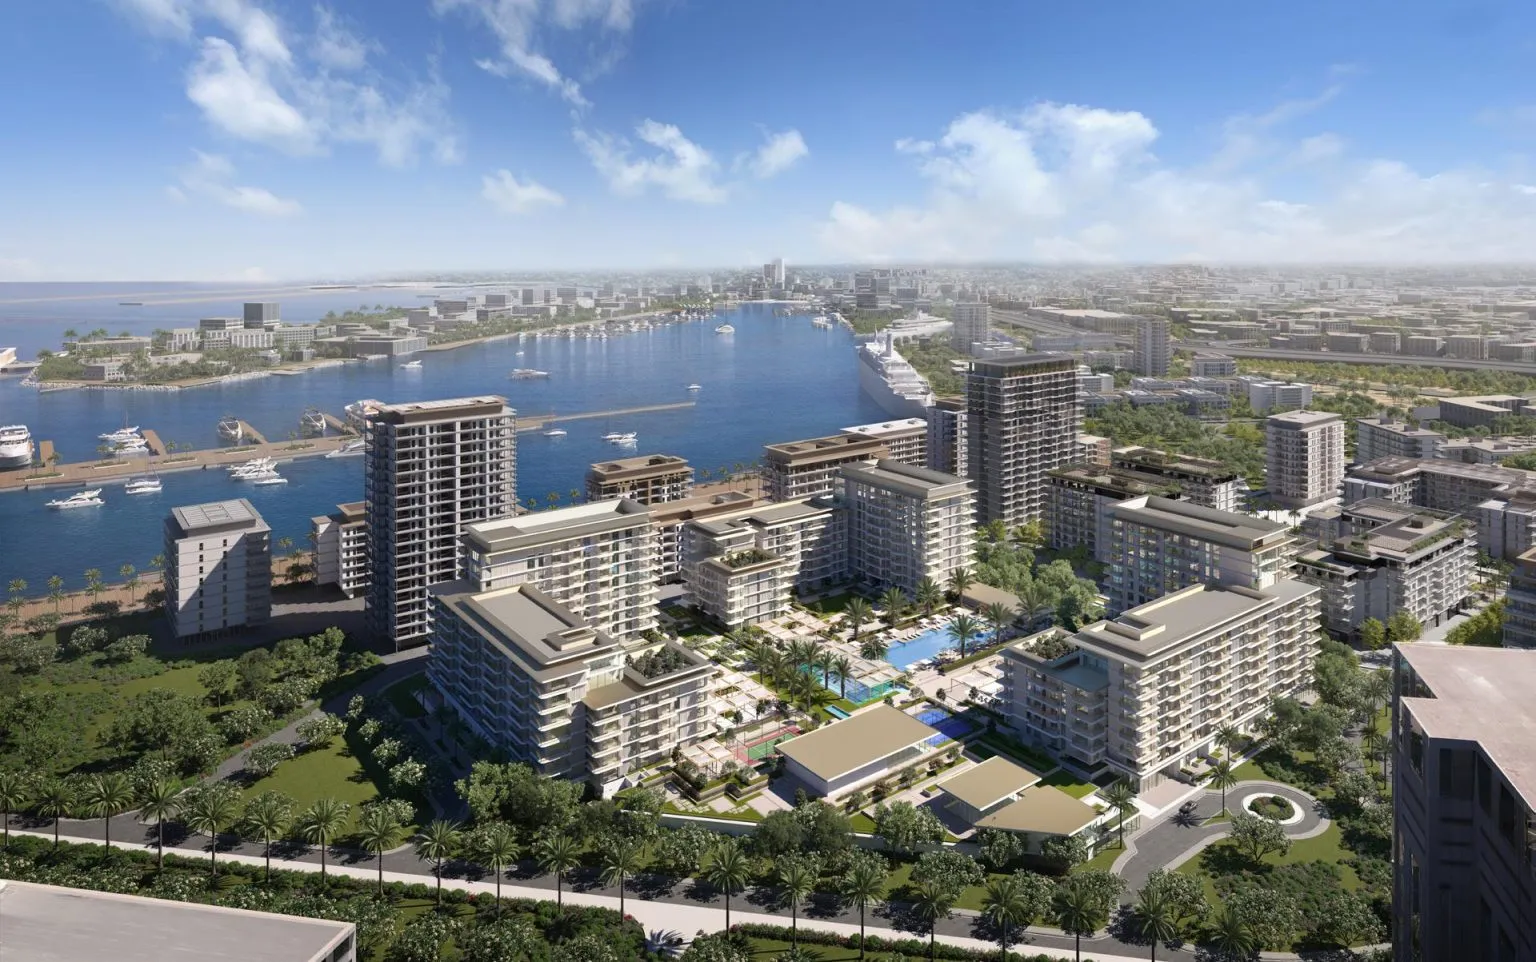 Clearpoint Apartments by EMAAR